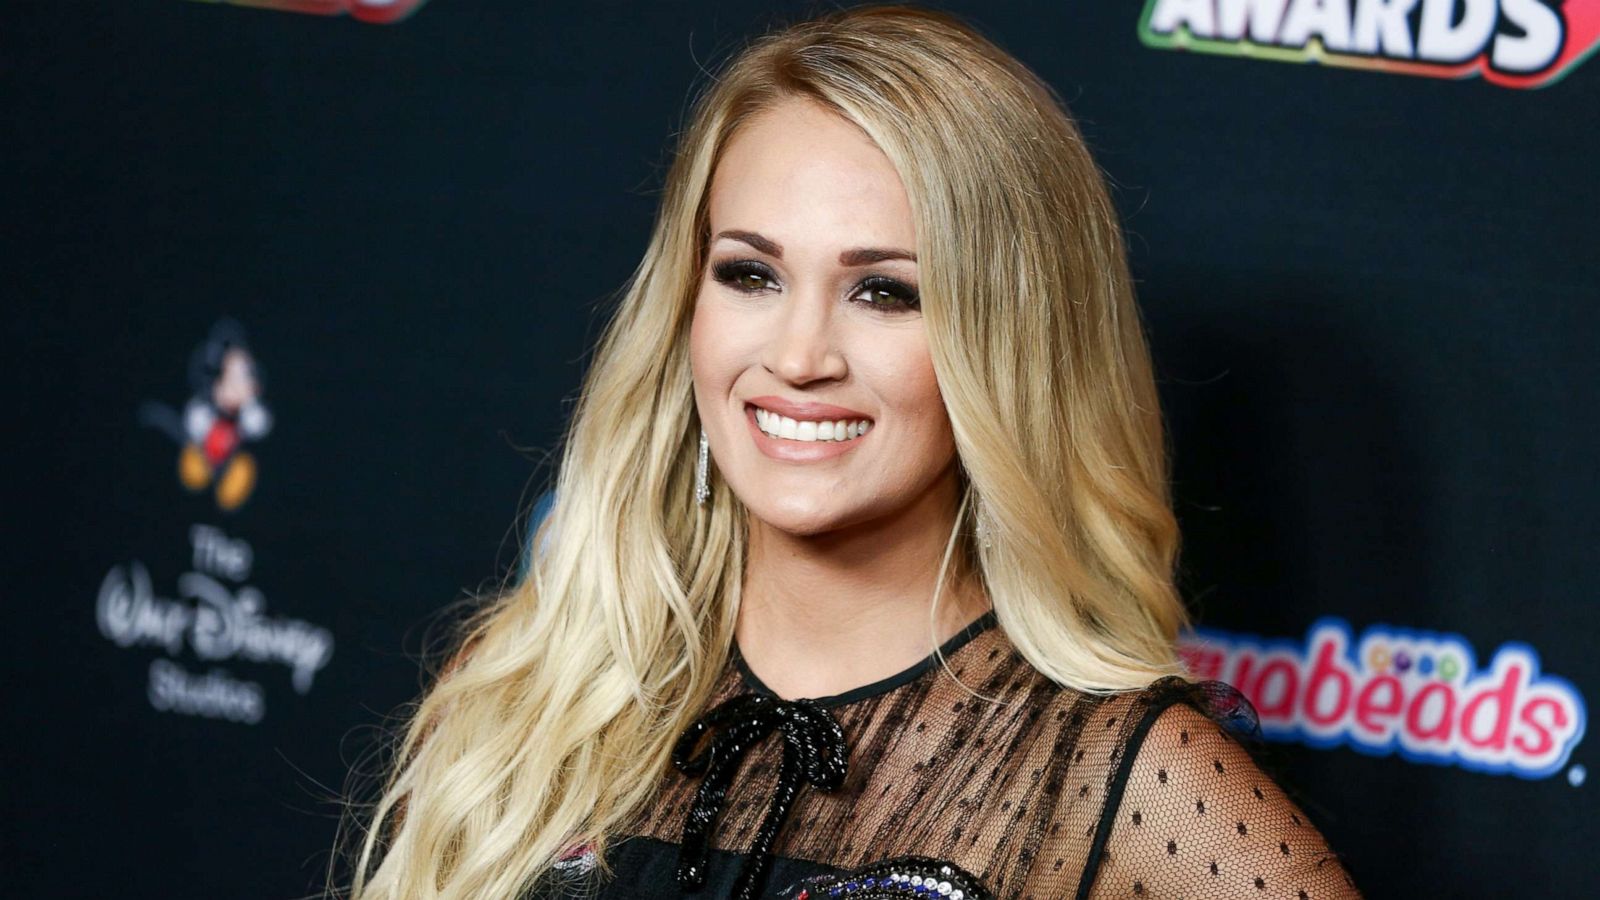 Carrie Underwood prepares to leave sons, husband as major change